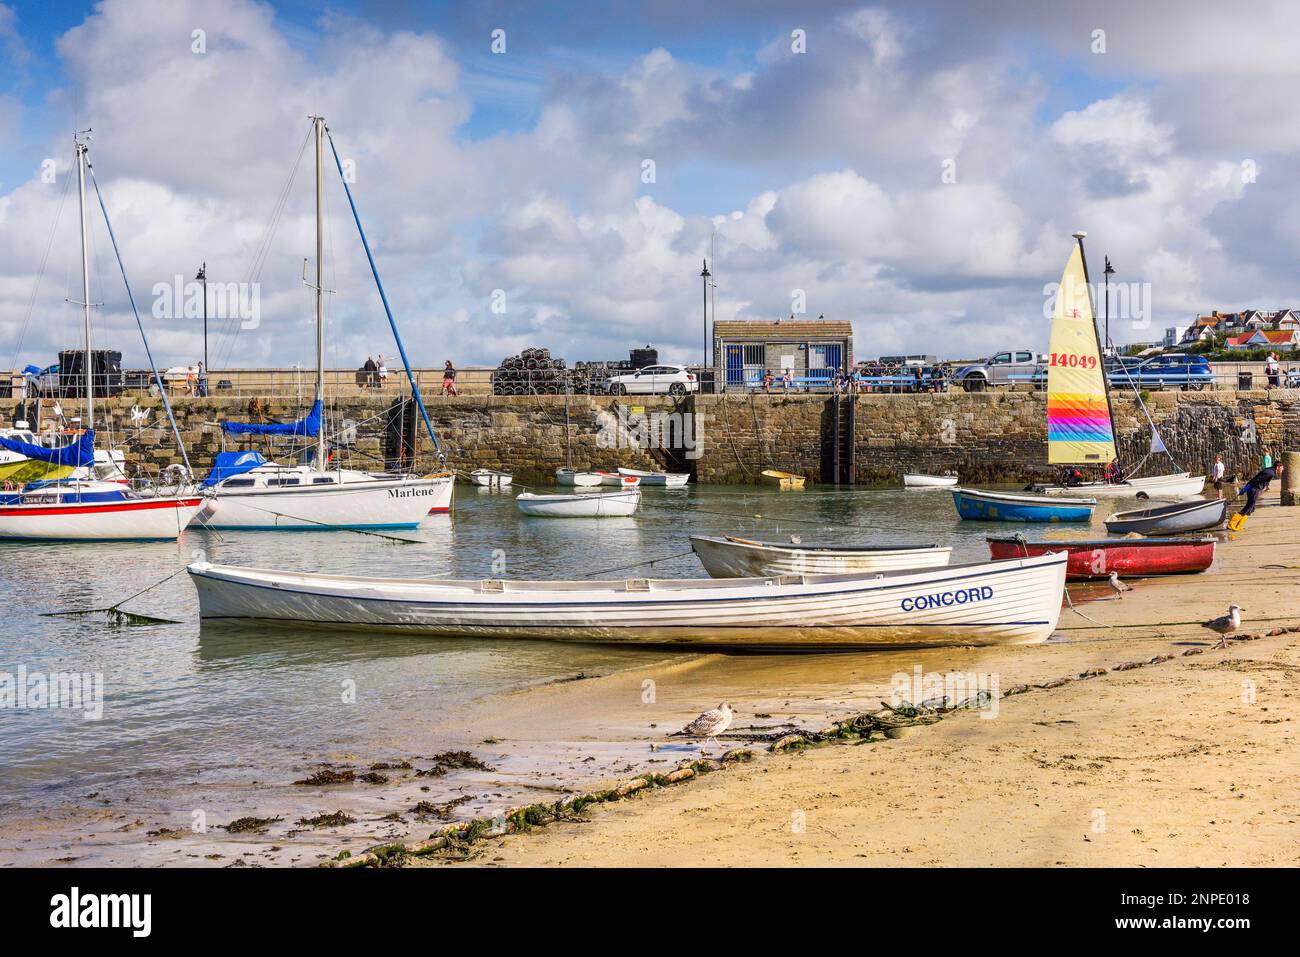 A traditional Cornish Pilot Gig beached on the beach in the historic picturesque working Newquay Harbour in Newquay on the North Cornwall coast. Stock Photo